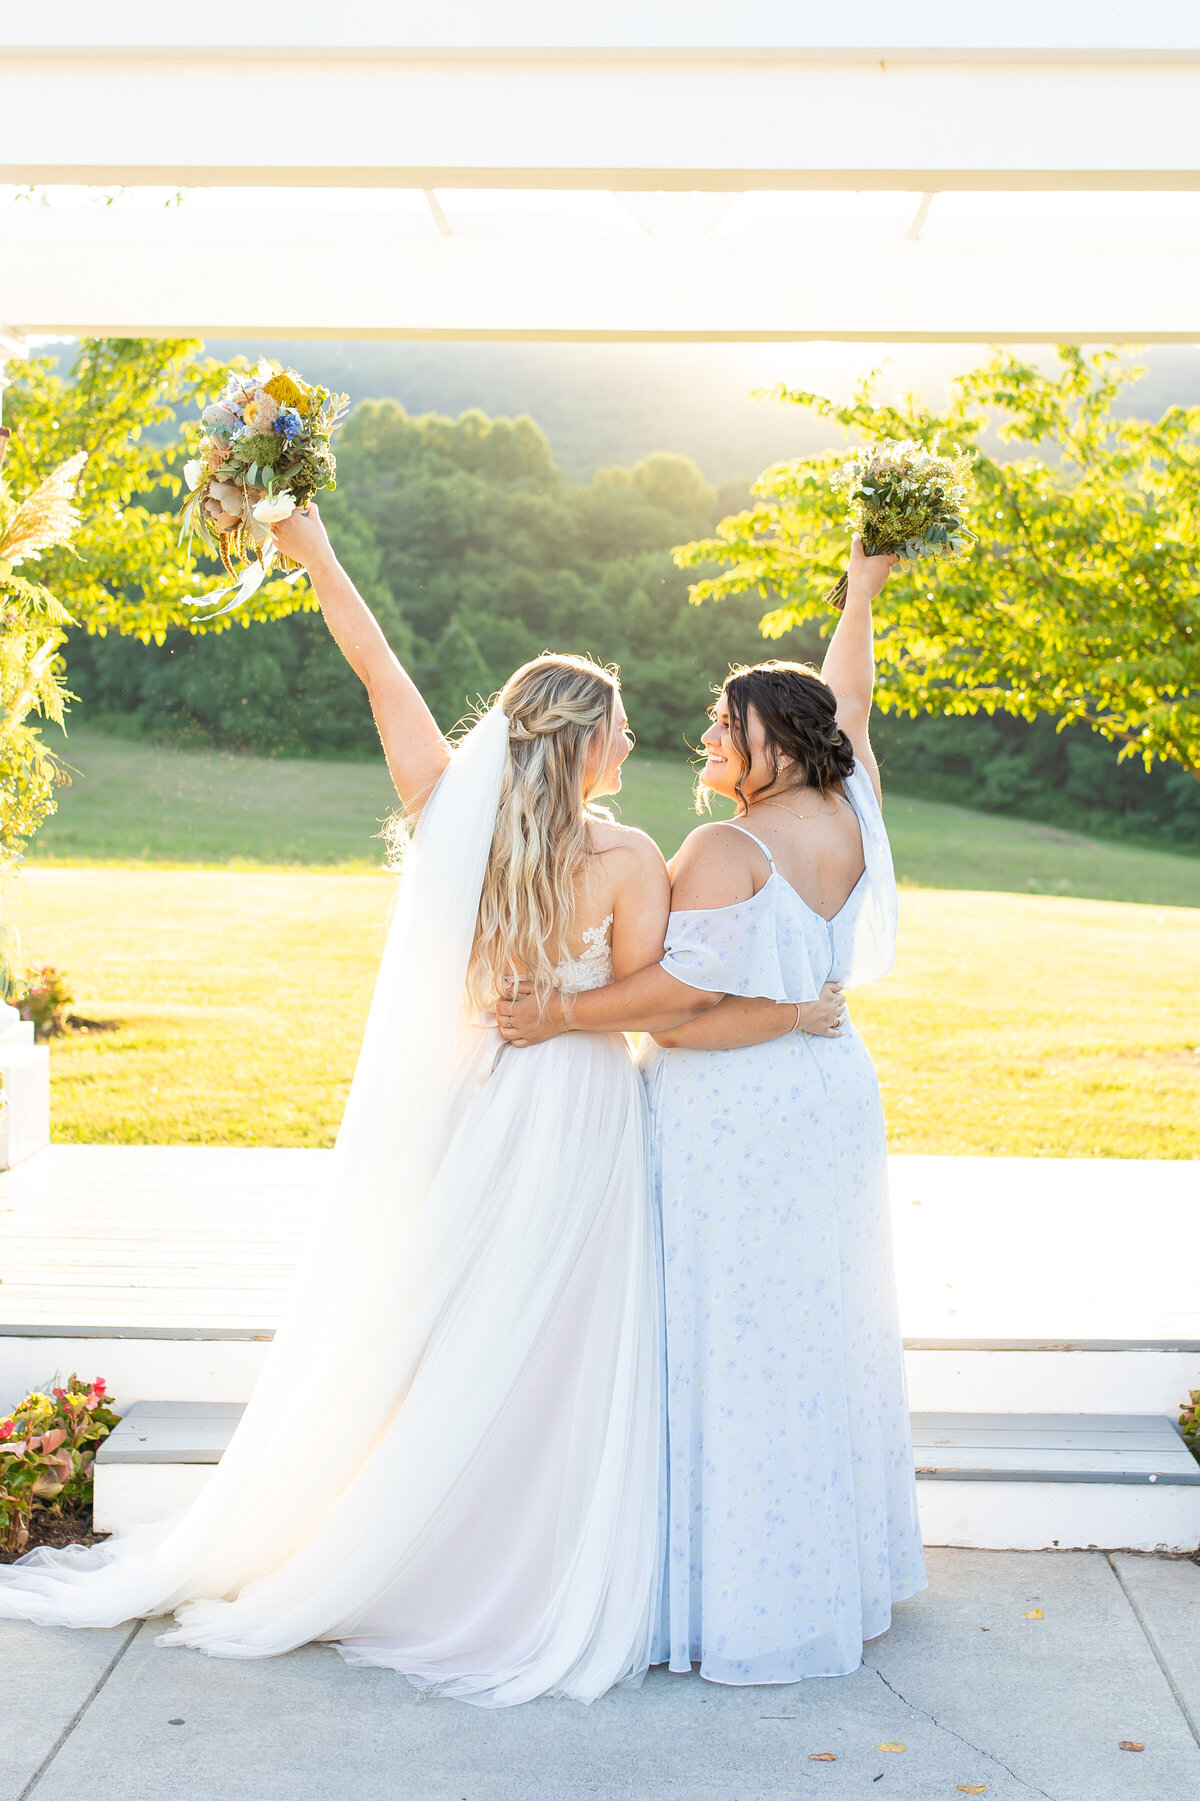 Taylor Main Photography is a wedding photographer based in Raleigh North Carolina serving North Carolina, Virginia and Beyond Brides and Grooms